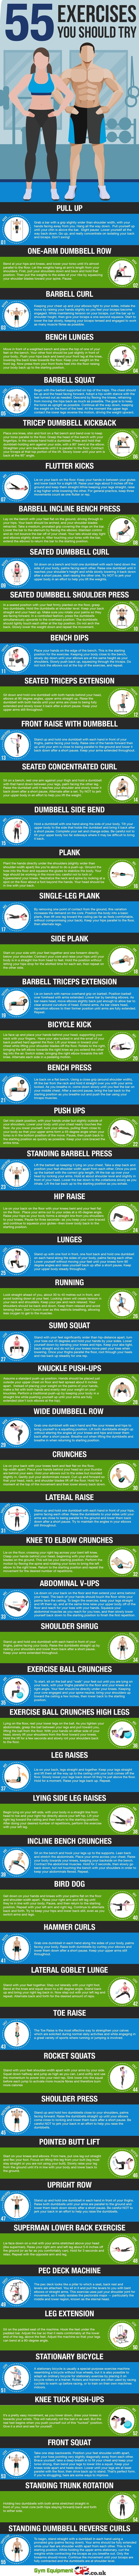 55 exercises gym workout infographic